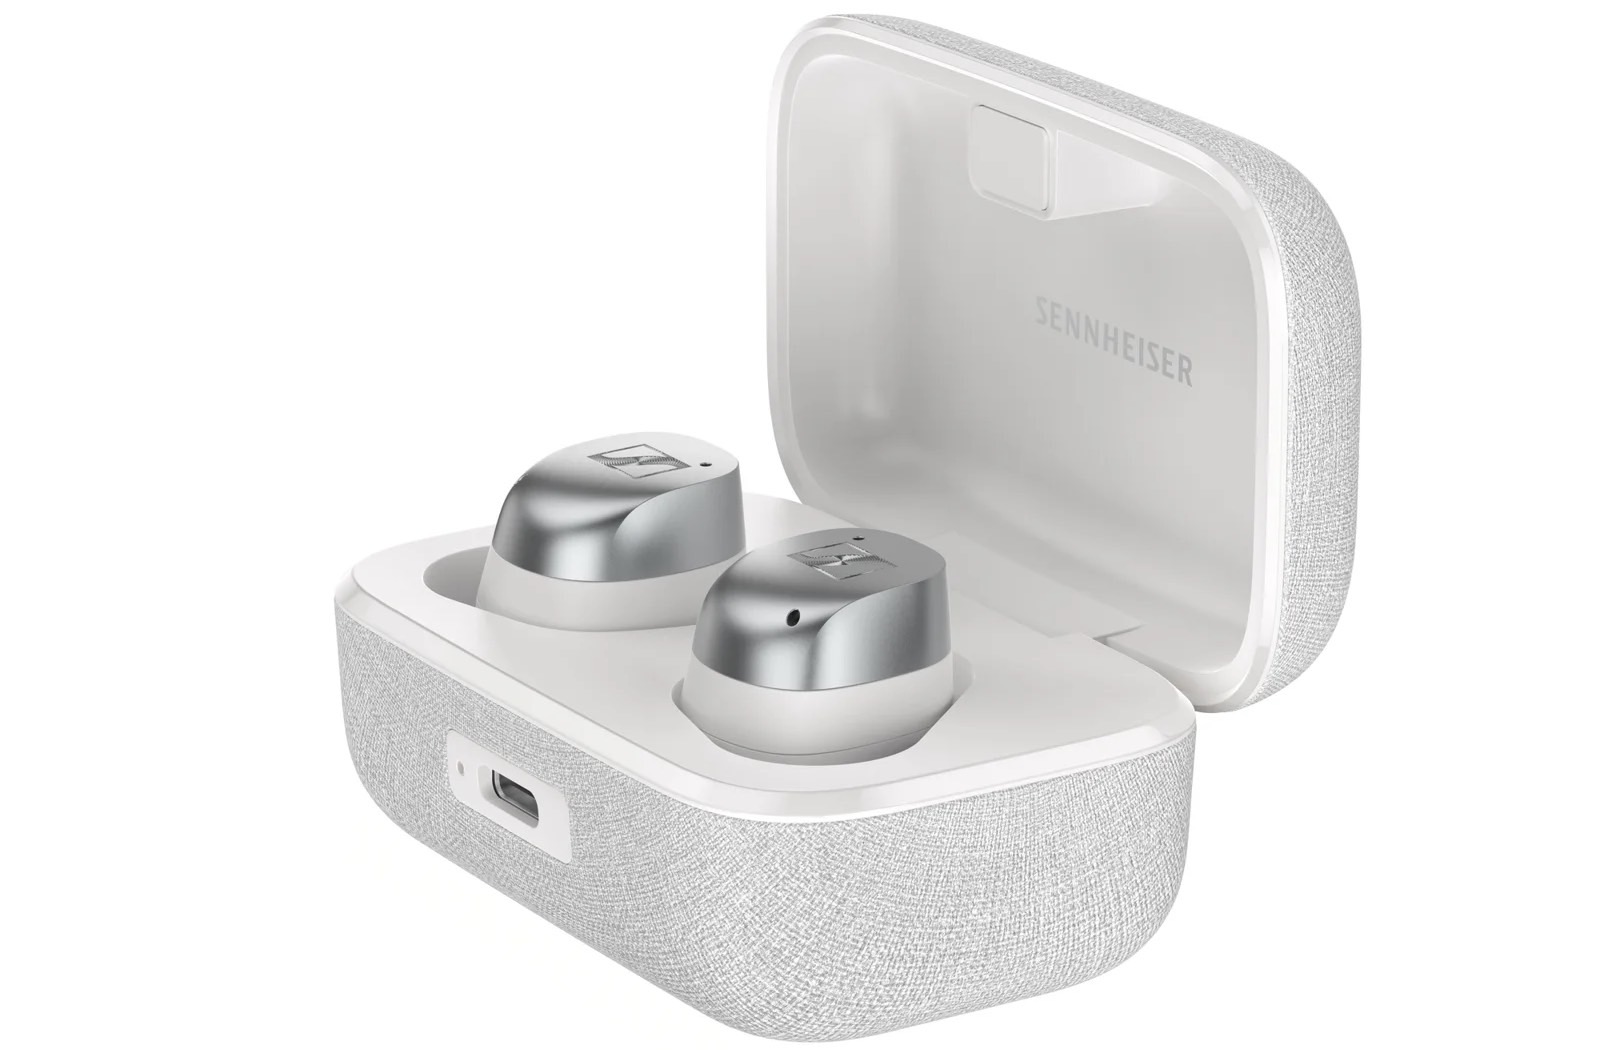  Sennheiser Consumer Audio Momentum 4 Wireless Headphones -  Bluetooth Headset for Crystal-Clear Calls with Adaptive Noise Cancellation,  60h Battery Life, Customizable Sound - White )